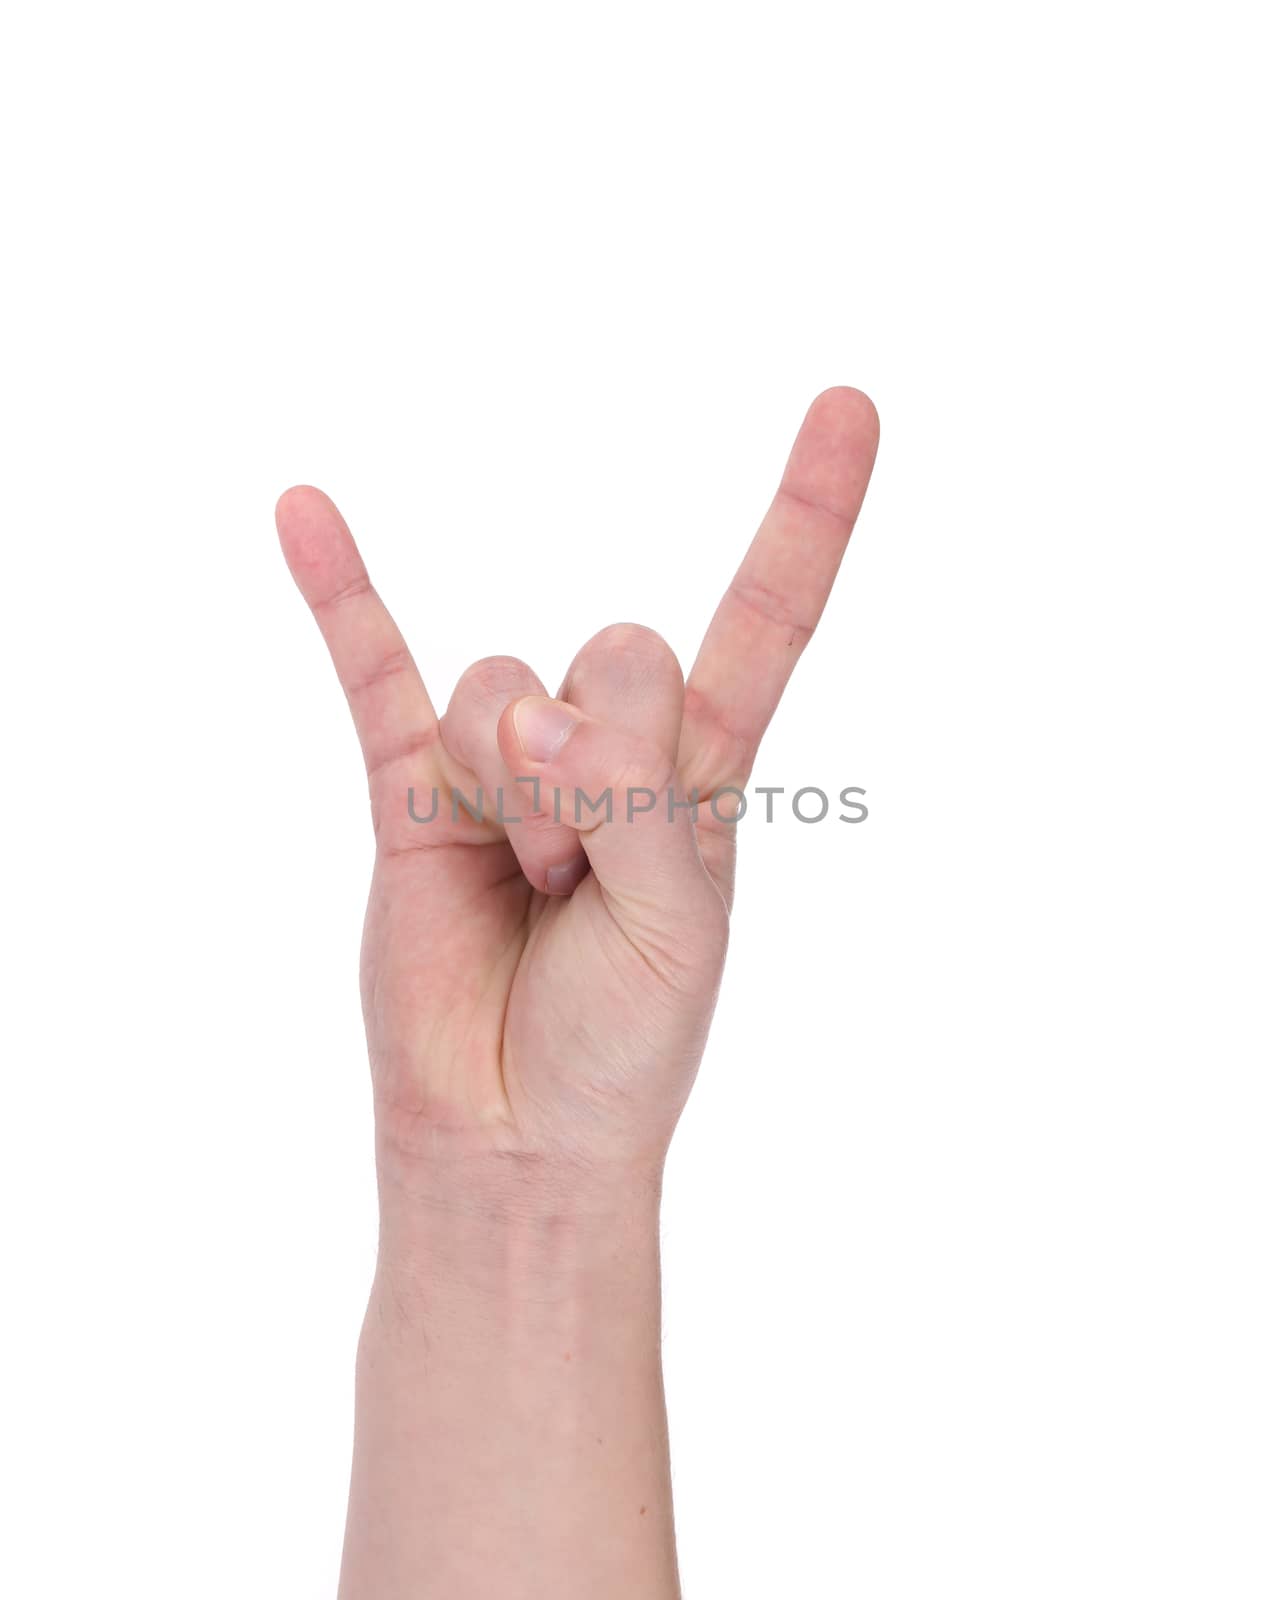 Rock sign by male hand. Isolated on a white background.